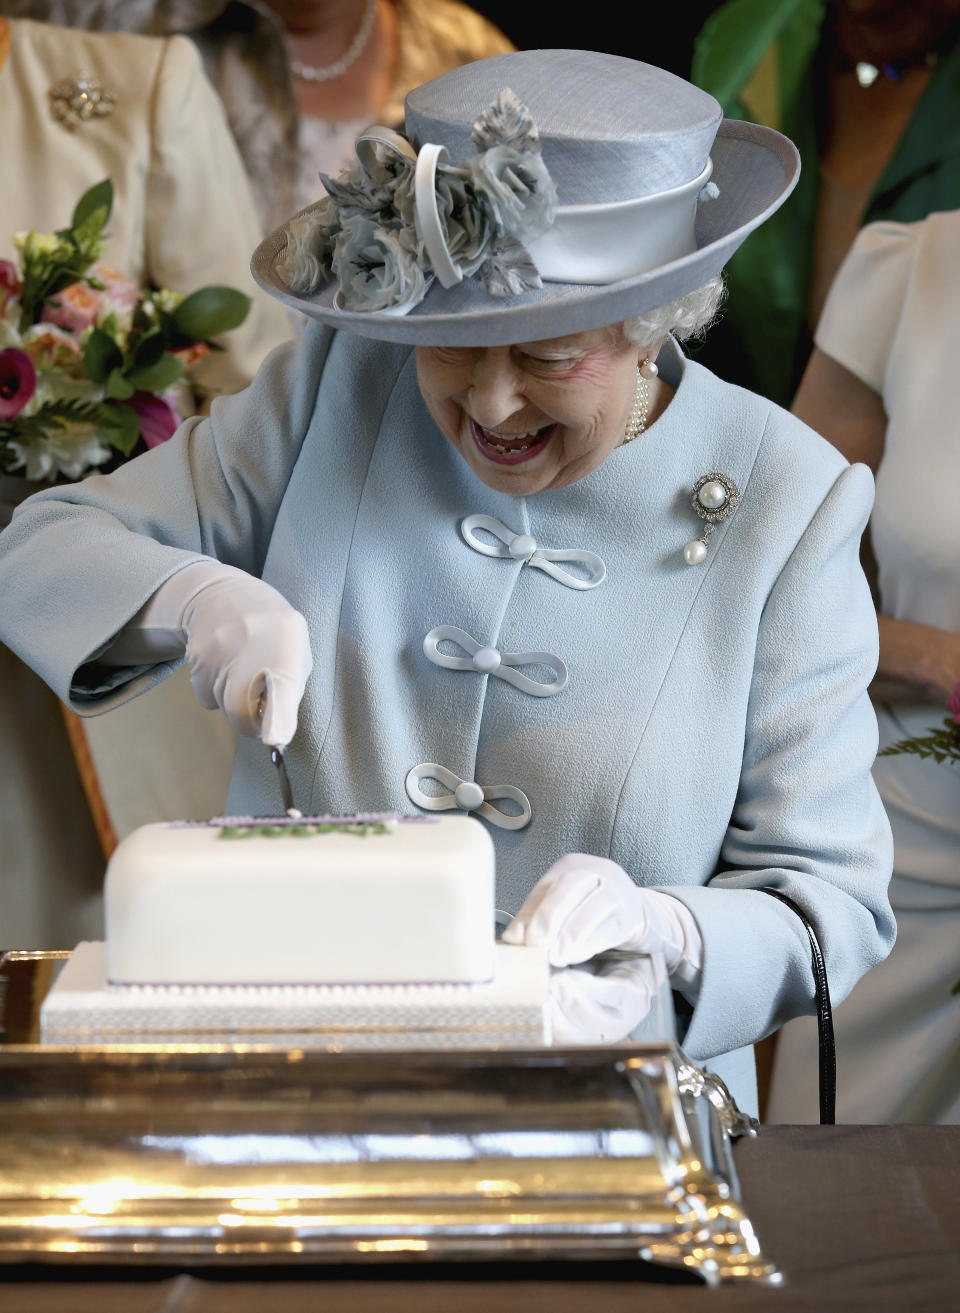 Britain's Queen Elizabeth cuts a Women's Institute Celebrating 100 Years cake at the Royal Albert Hall in London on June 4, 2015. (This is not the&nbsp;chocolate biscuit cake).&nbsp; (Photo: REUTERS/Chris Jackson/pool)